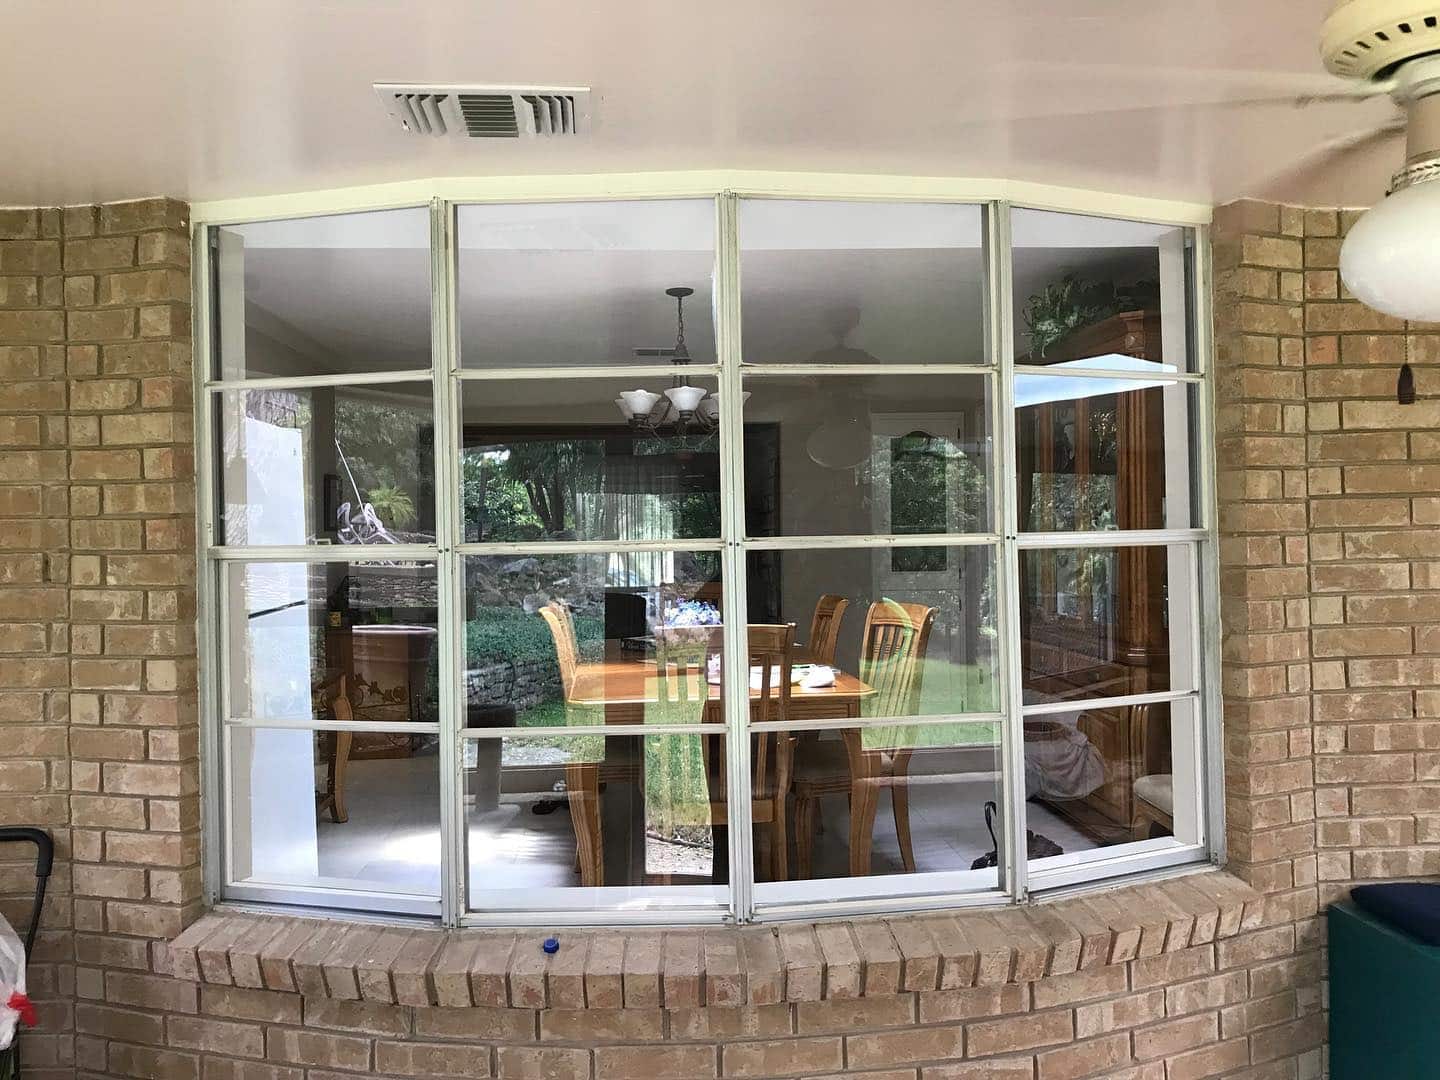 Before renovation: Dining area viewed through old multi-pane windows in a brick home in San Antonio.